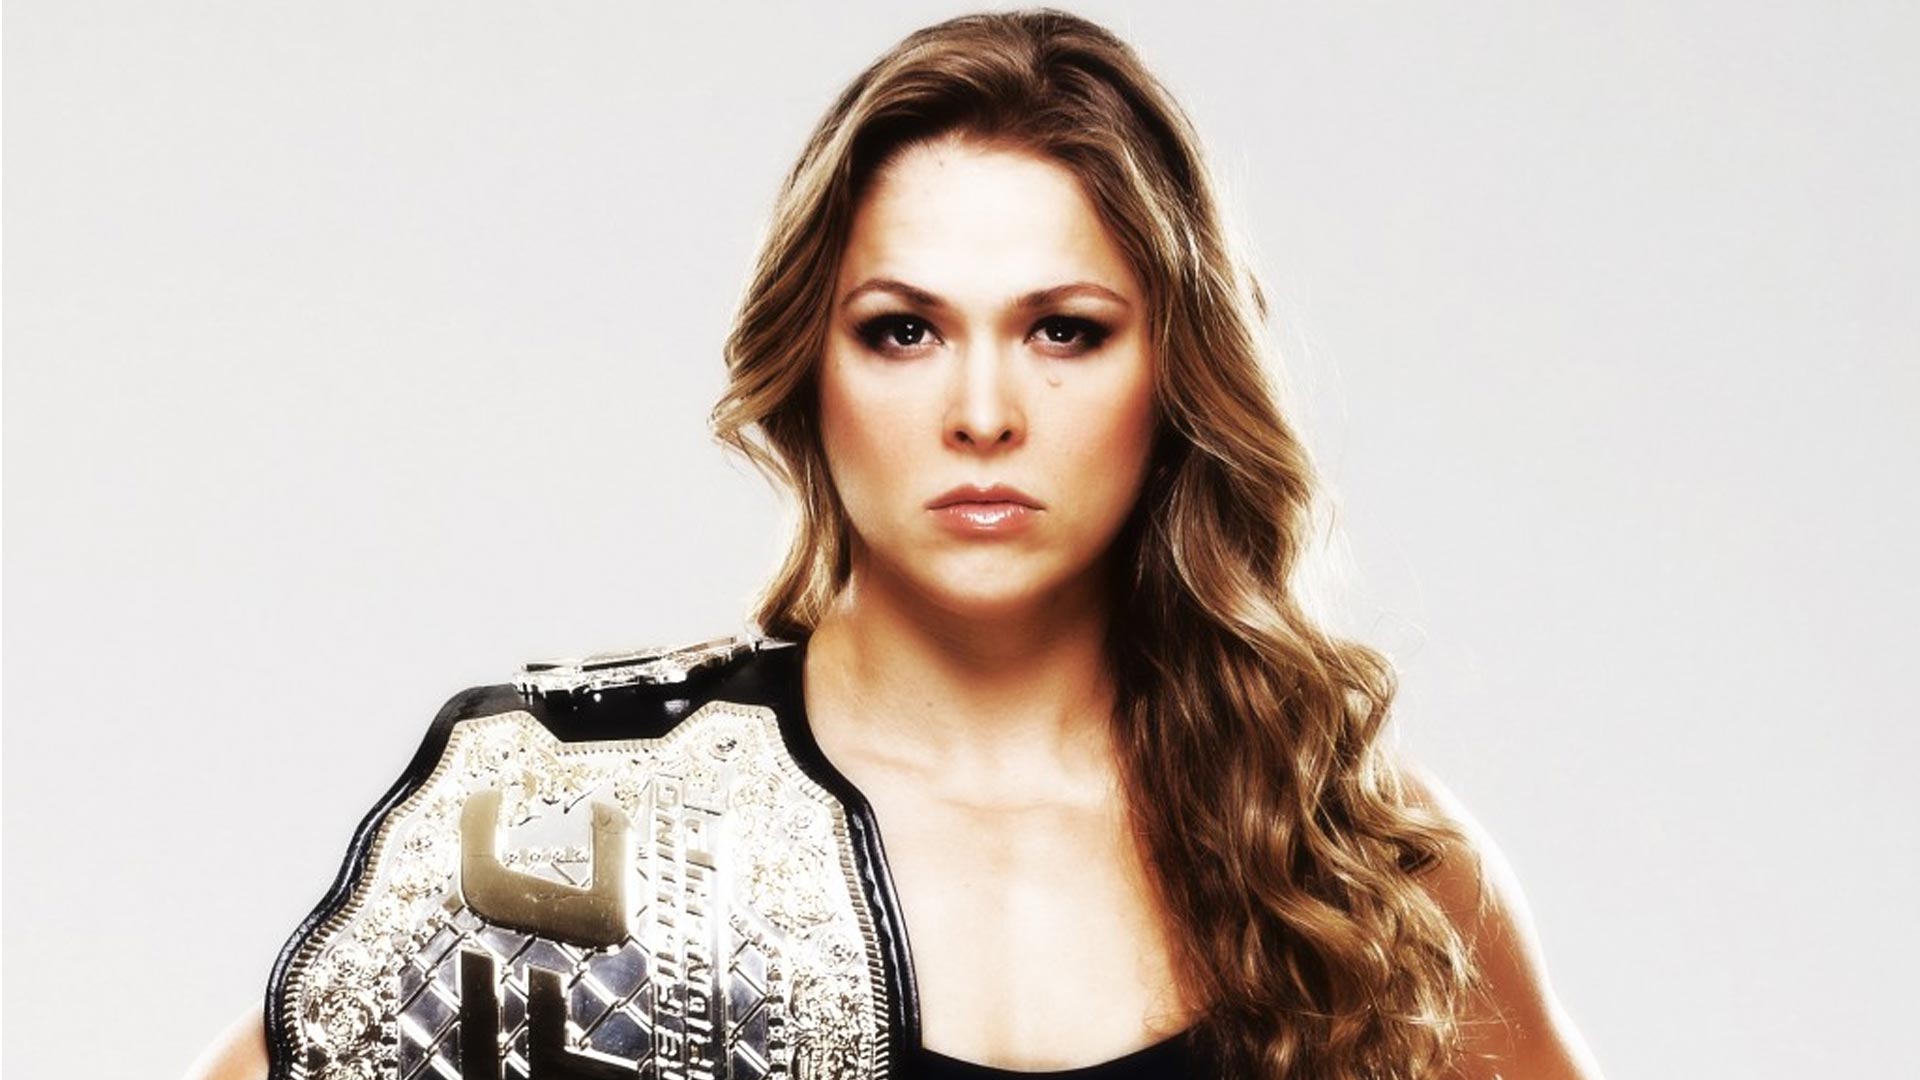 Ronda Rousey Wallpaper High Definition Quality Widescreen